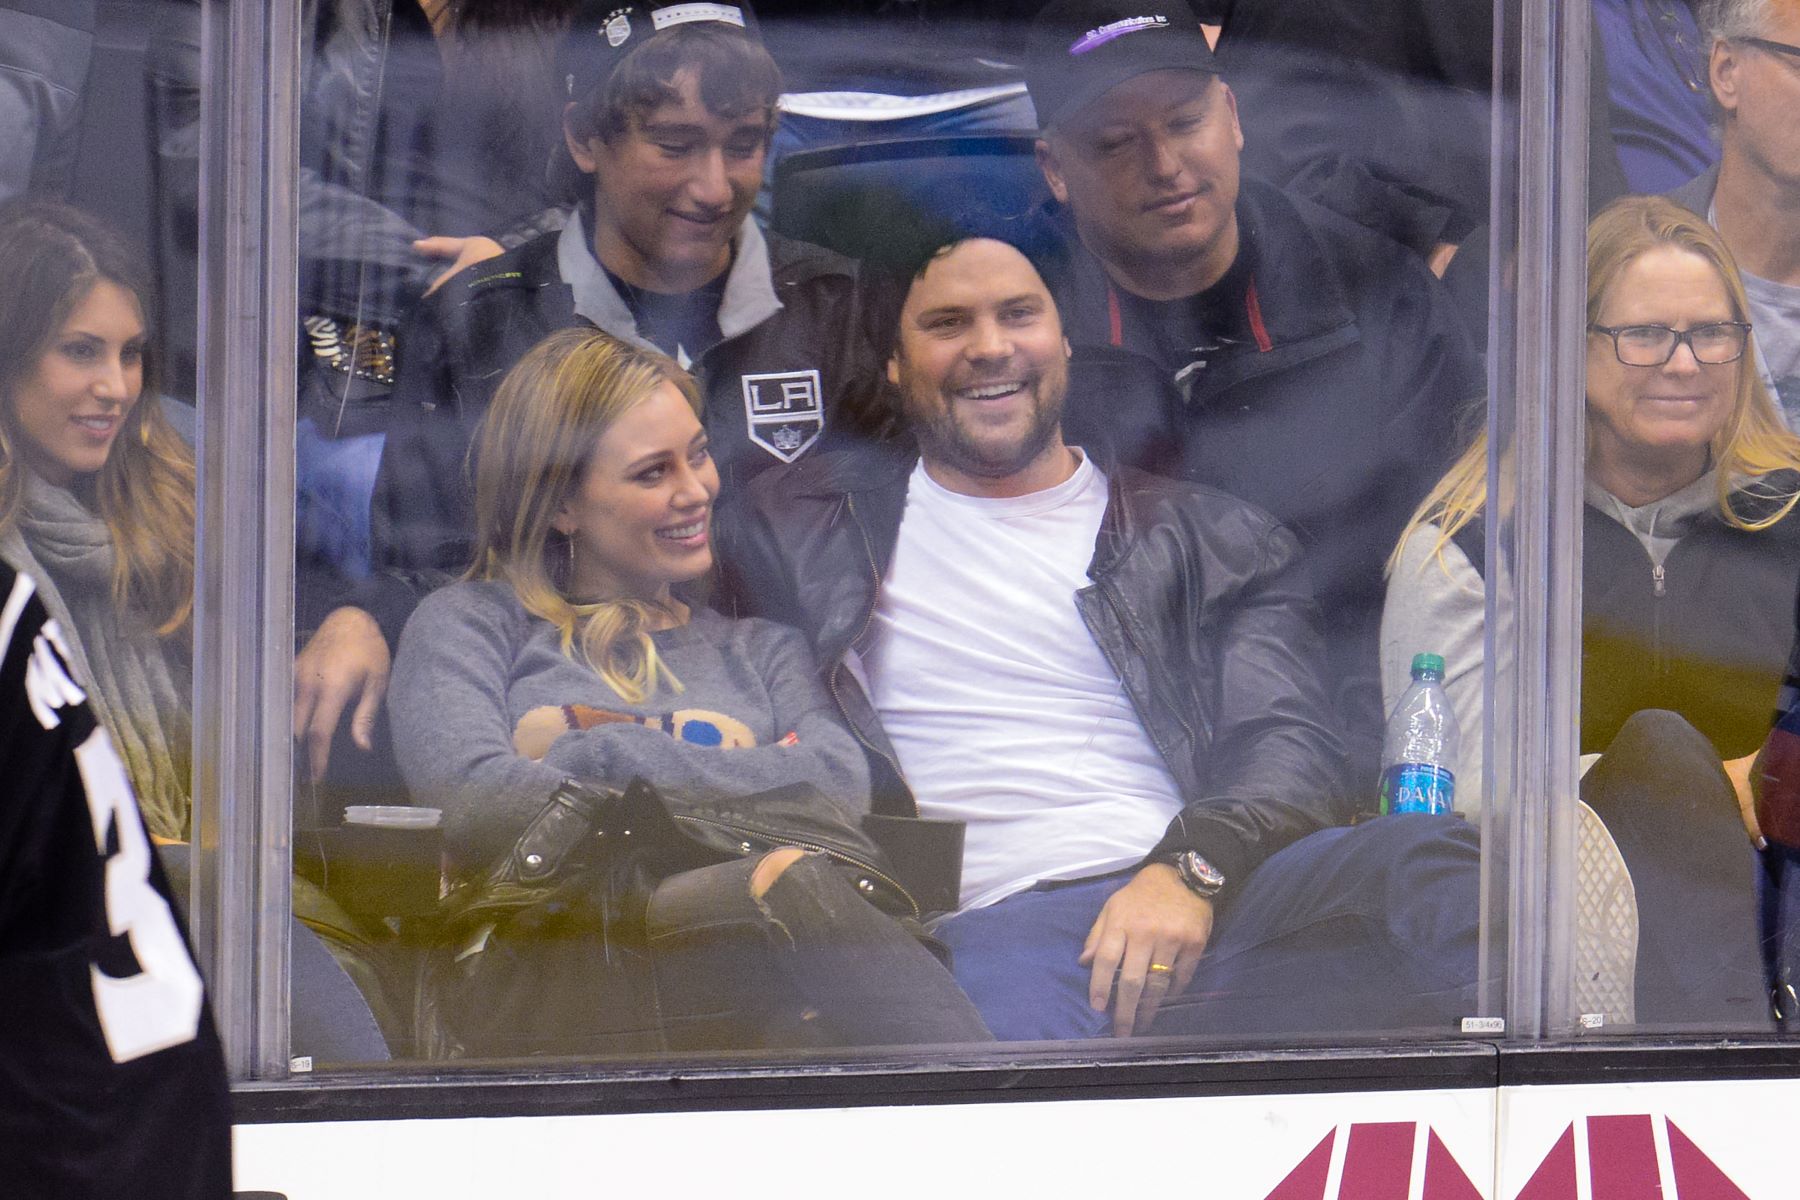 Hilary Duff and Mike Comrie attending a Los Angeles Kings hockey game against the Nashville Predators